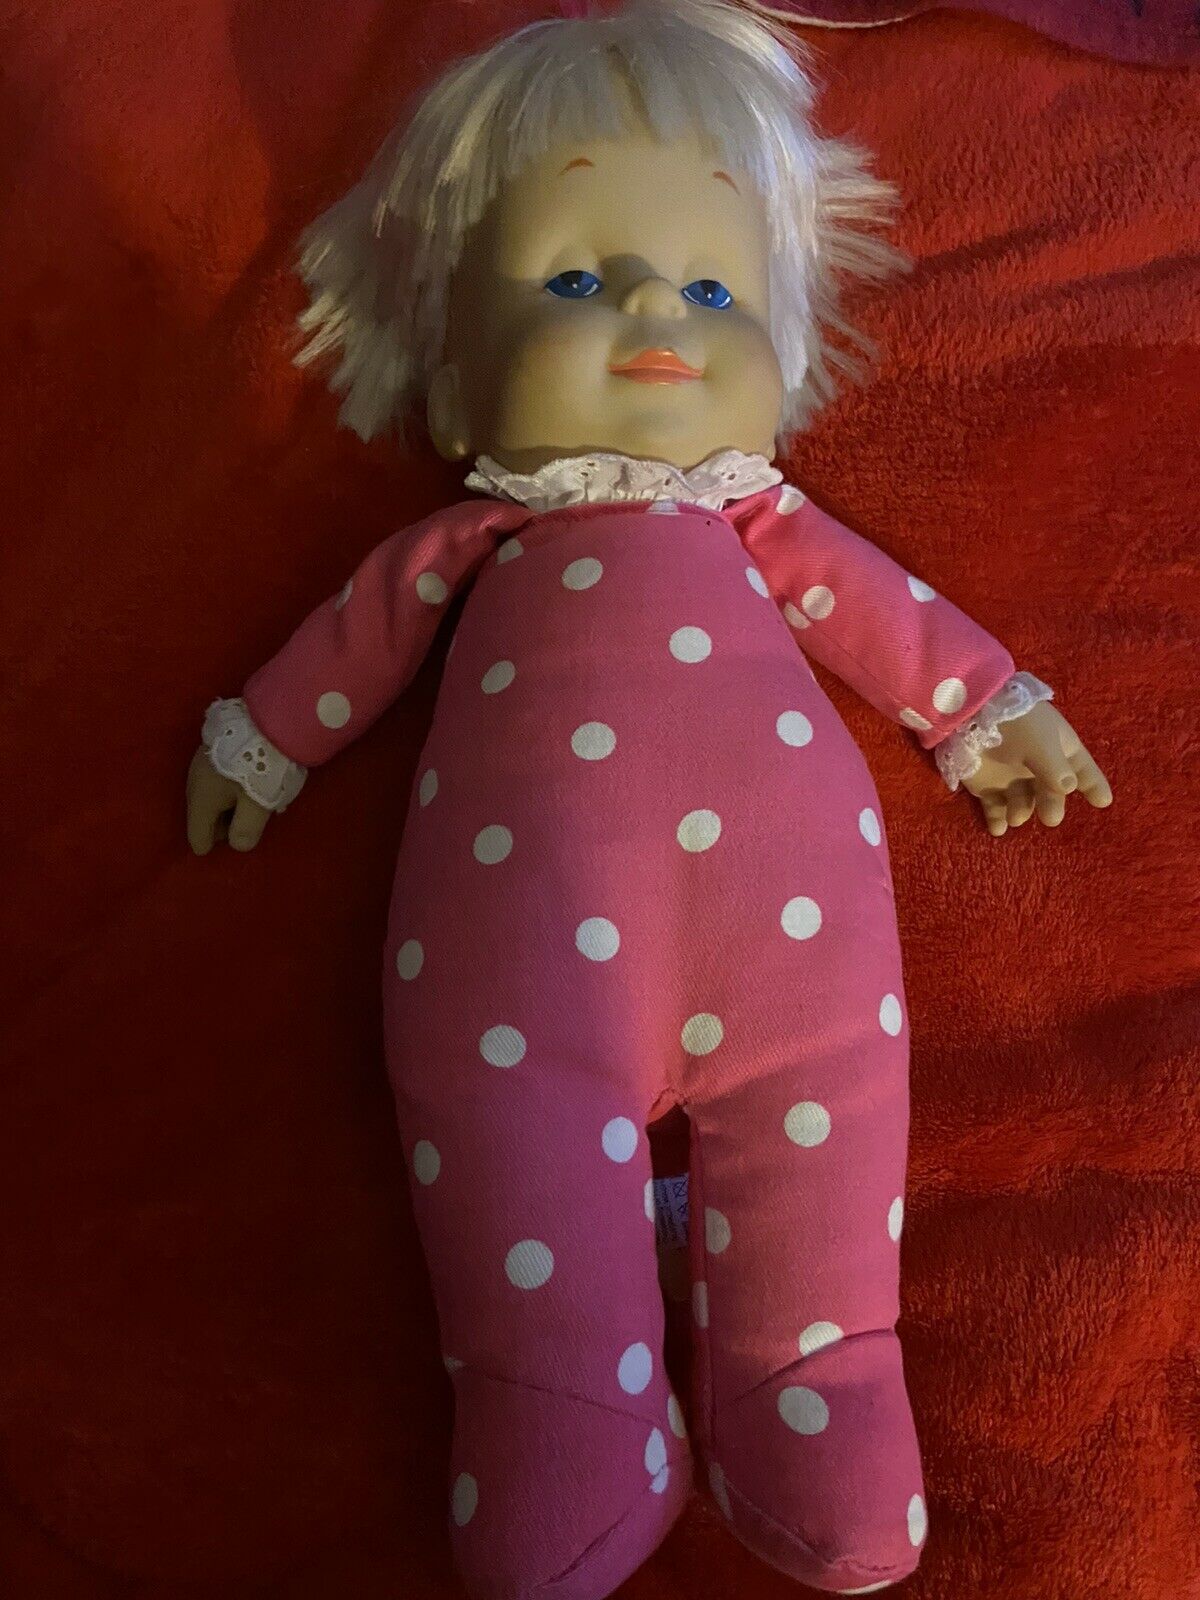 Drowsy Doll Mattel Classic Collection Talking Doll 15” - Works